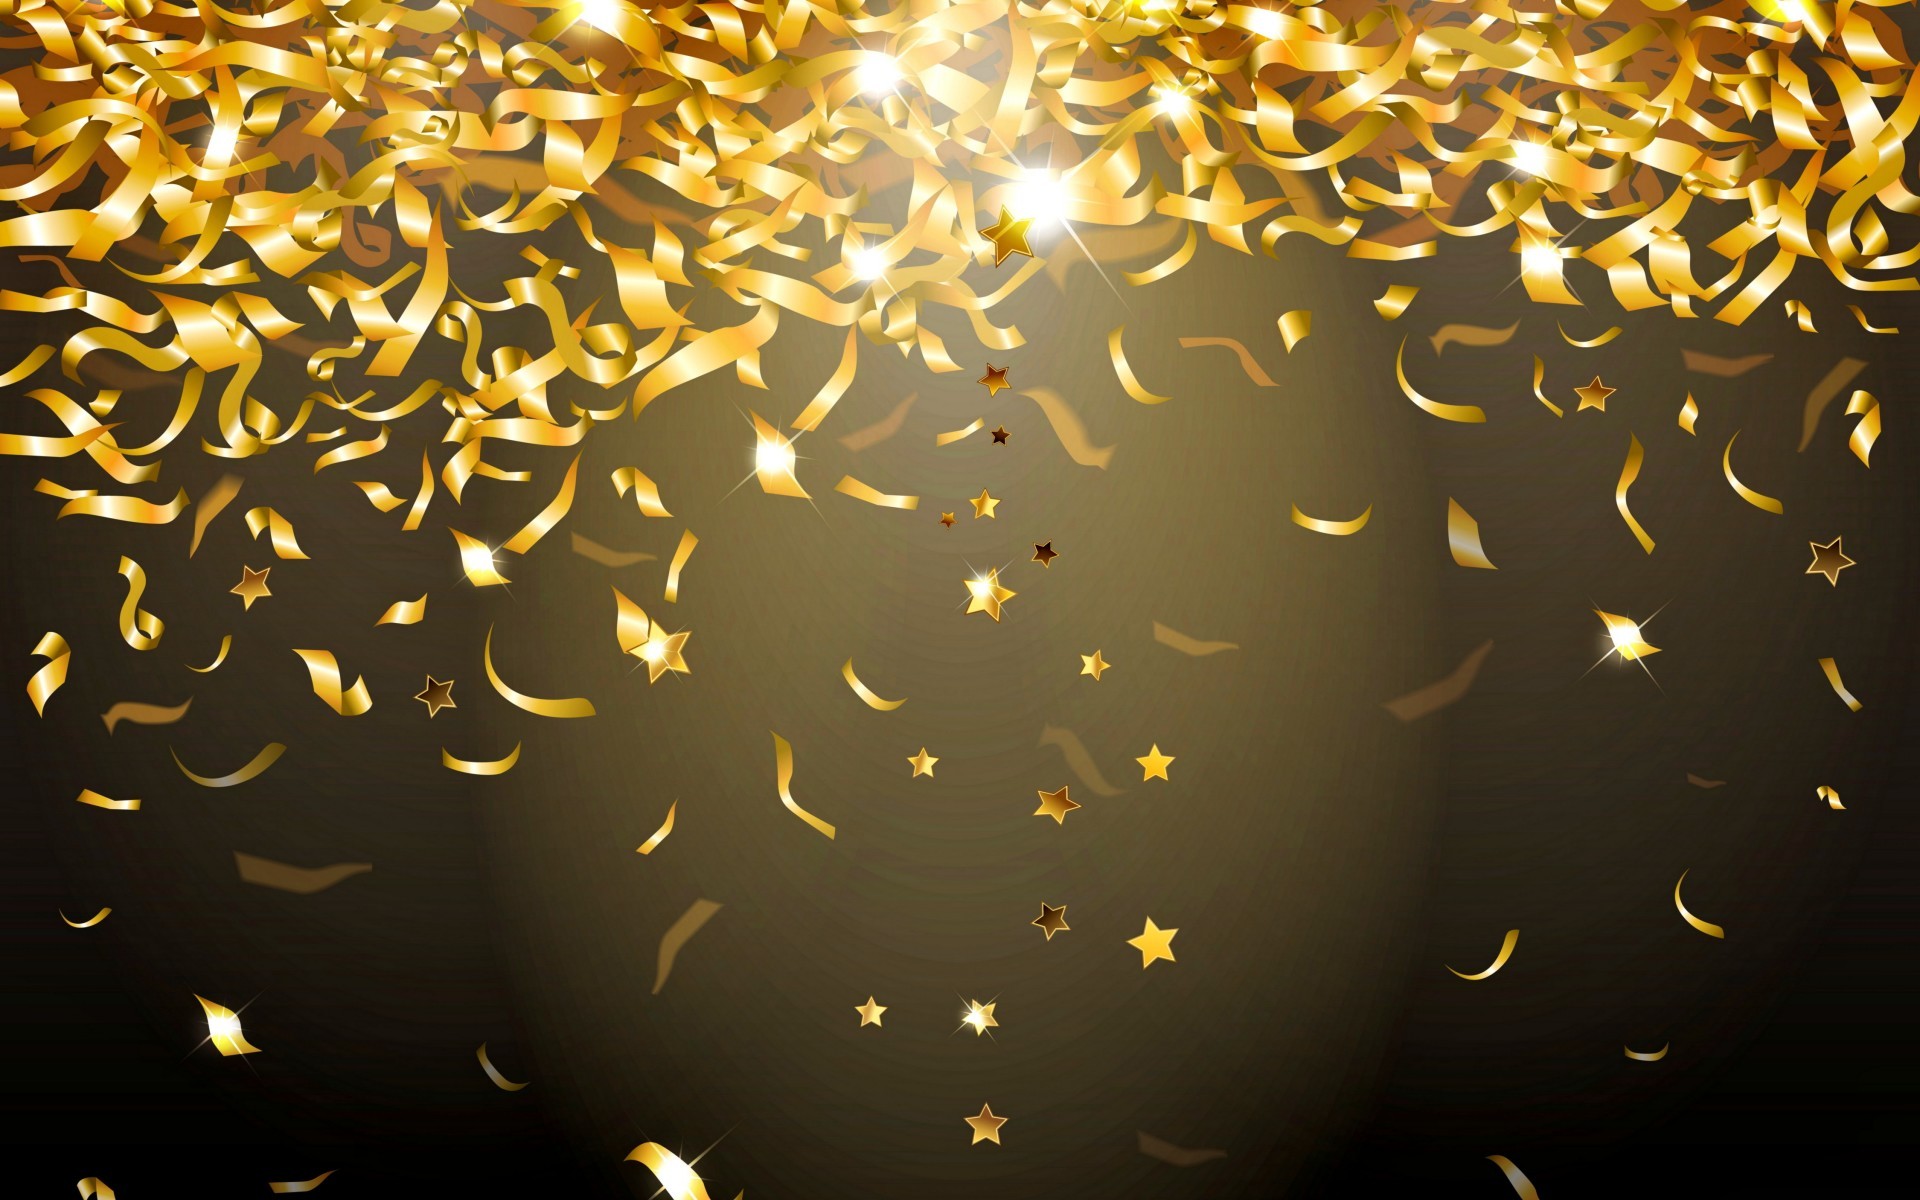 1920x1200 Gold Sparkle HD Wallpapers | Backgrounds | Very Glittery! | Pinterest | Gold  sparkle, Sparkle wallpaper and Gold